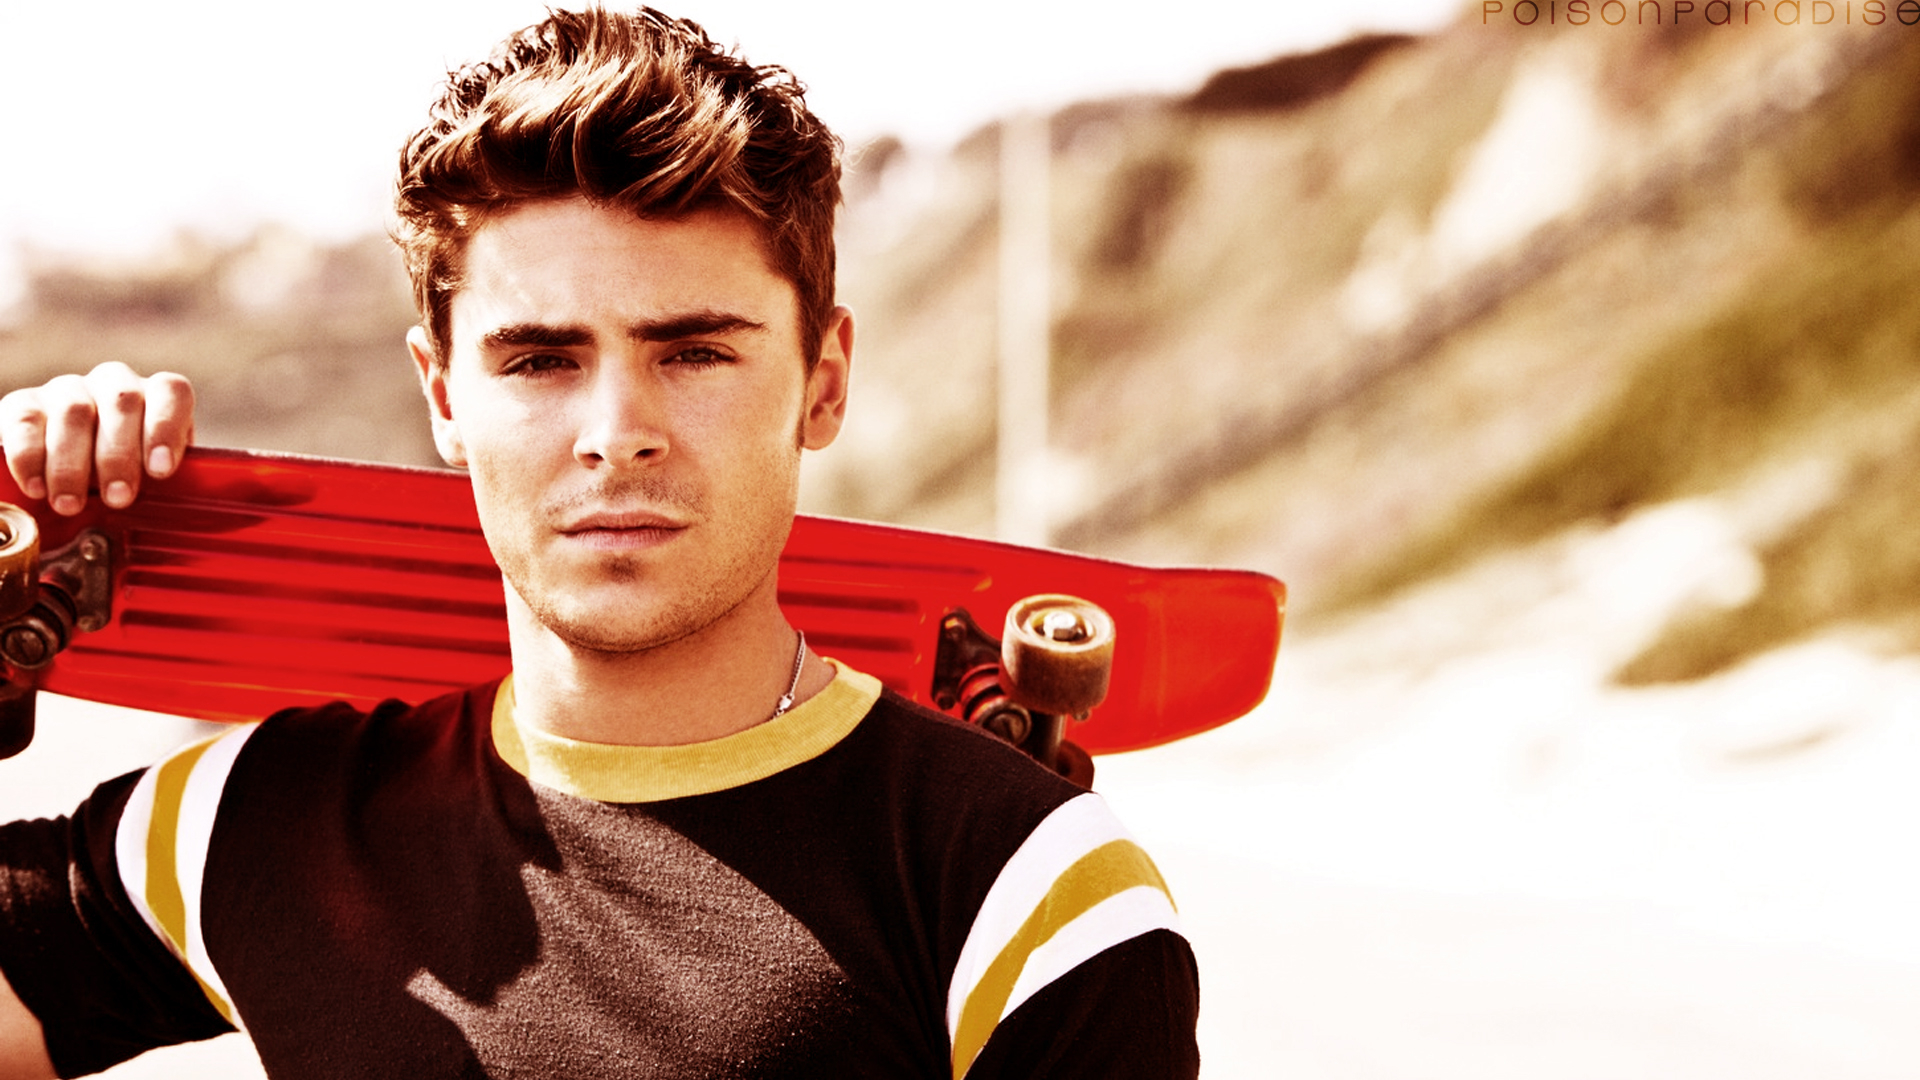 1920x1080 Free download Zac Efron Backgrounds Wallpaper High Definition High Quality [] for your Desktop, Mobile \u0026 Tablet | Explore 73+ Zac Efron Desktop Wallpaper | Zac Efron Wallpaper, Zac Efron 2019 Wallpapers